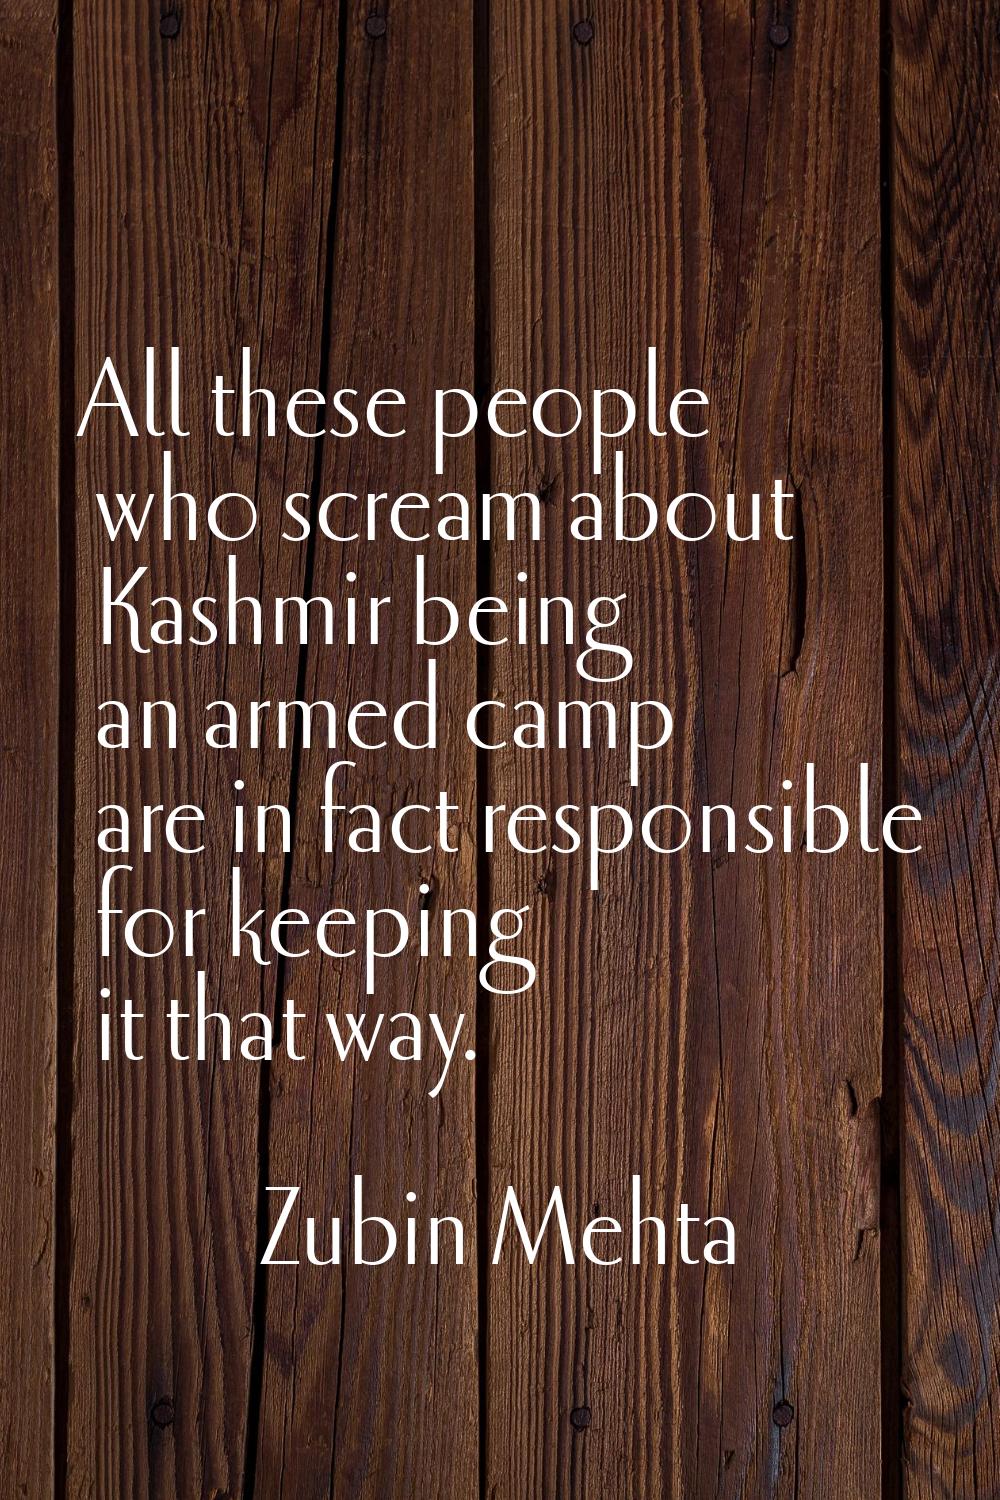 All these people who scream about Kashmir being an armed camp are in fact responsible for keeping i